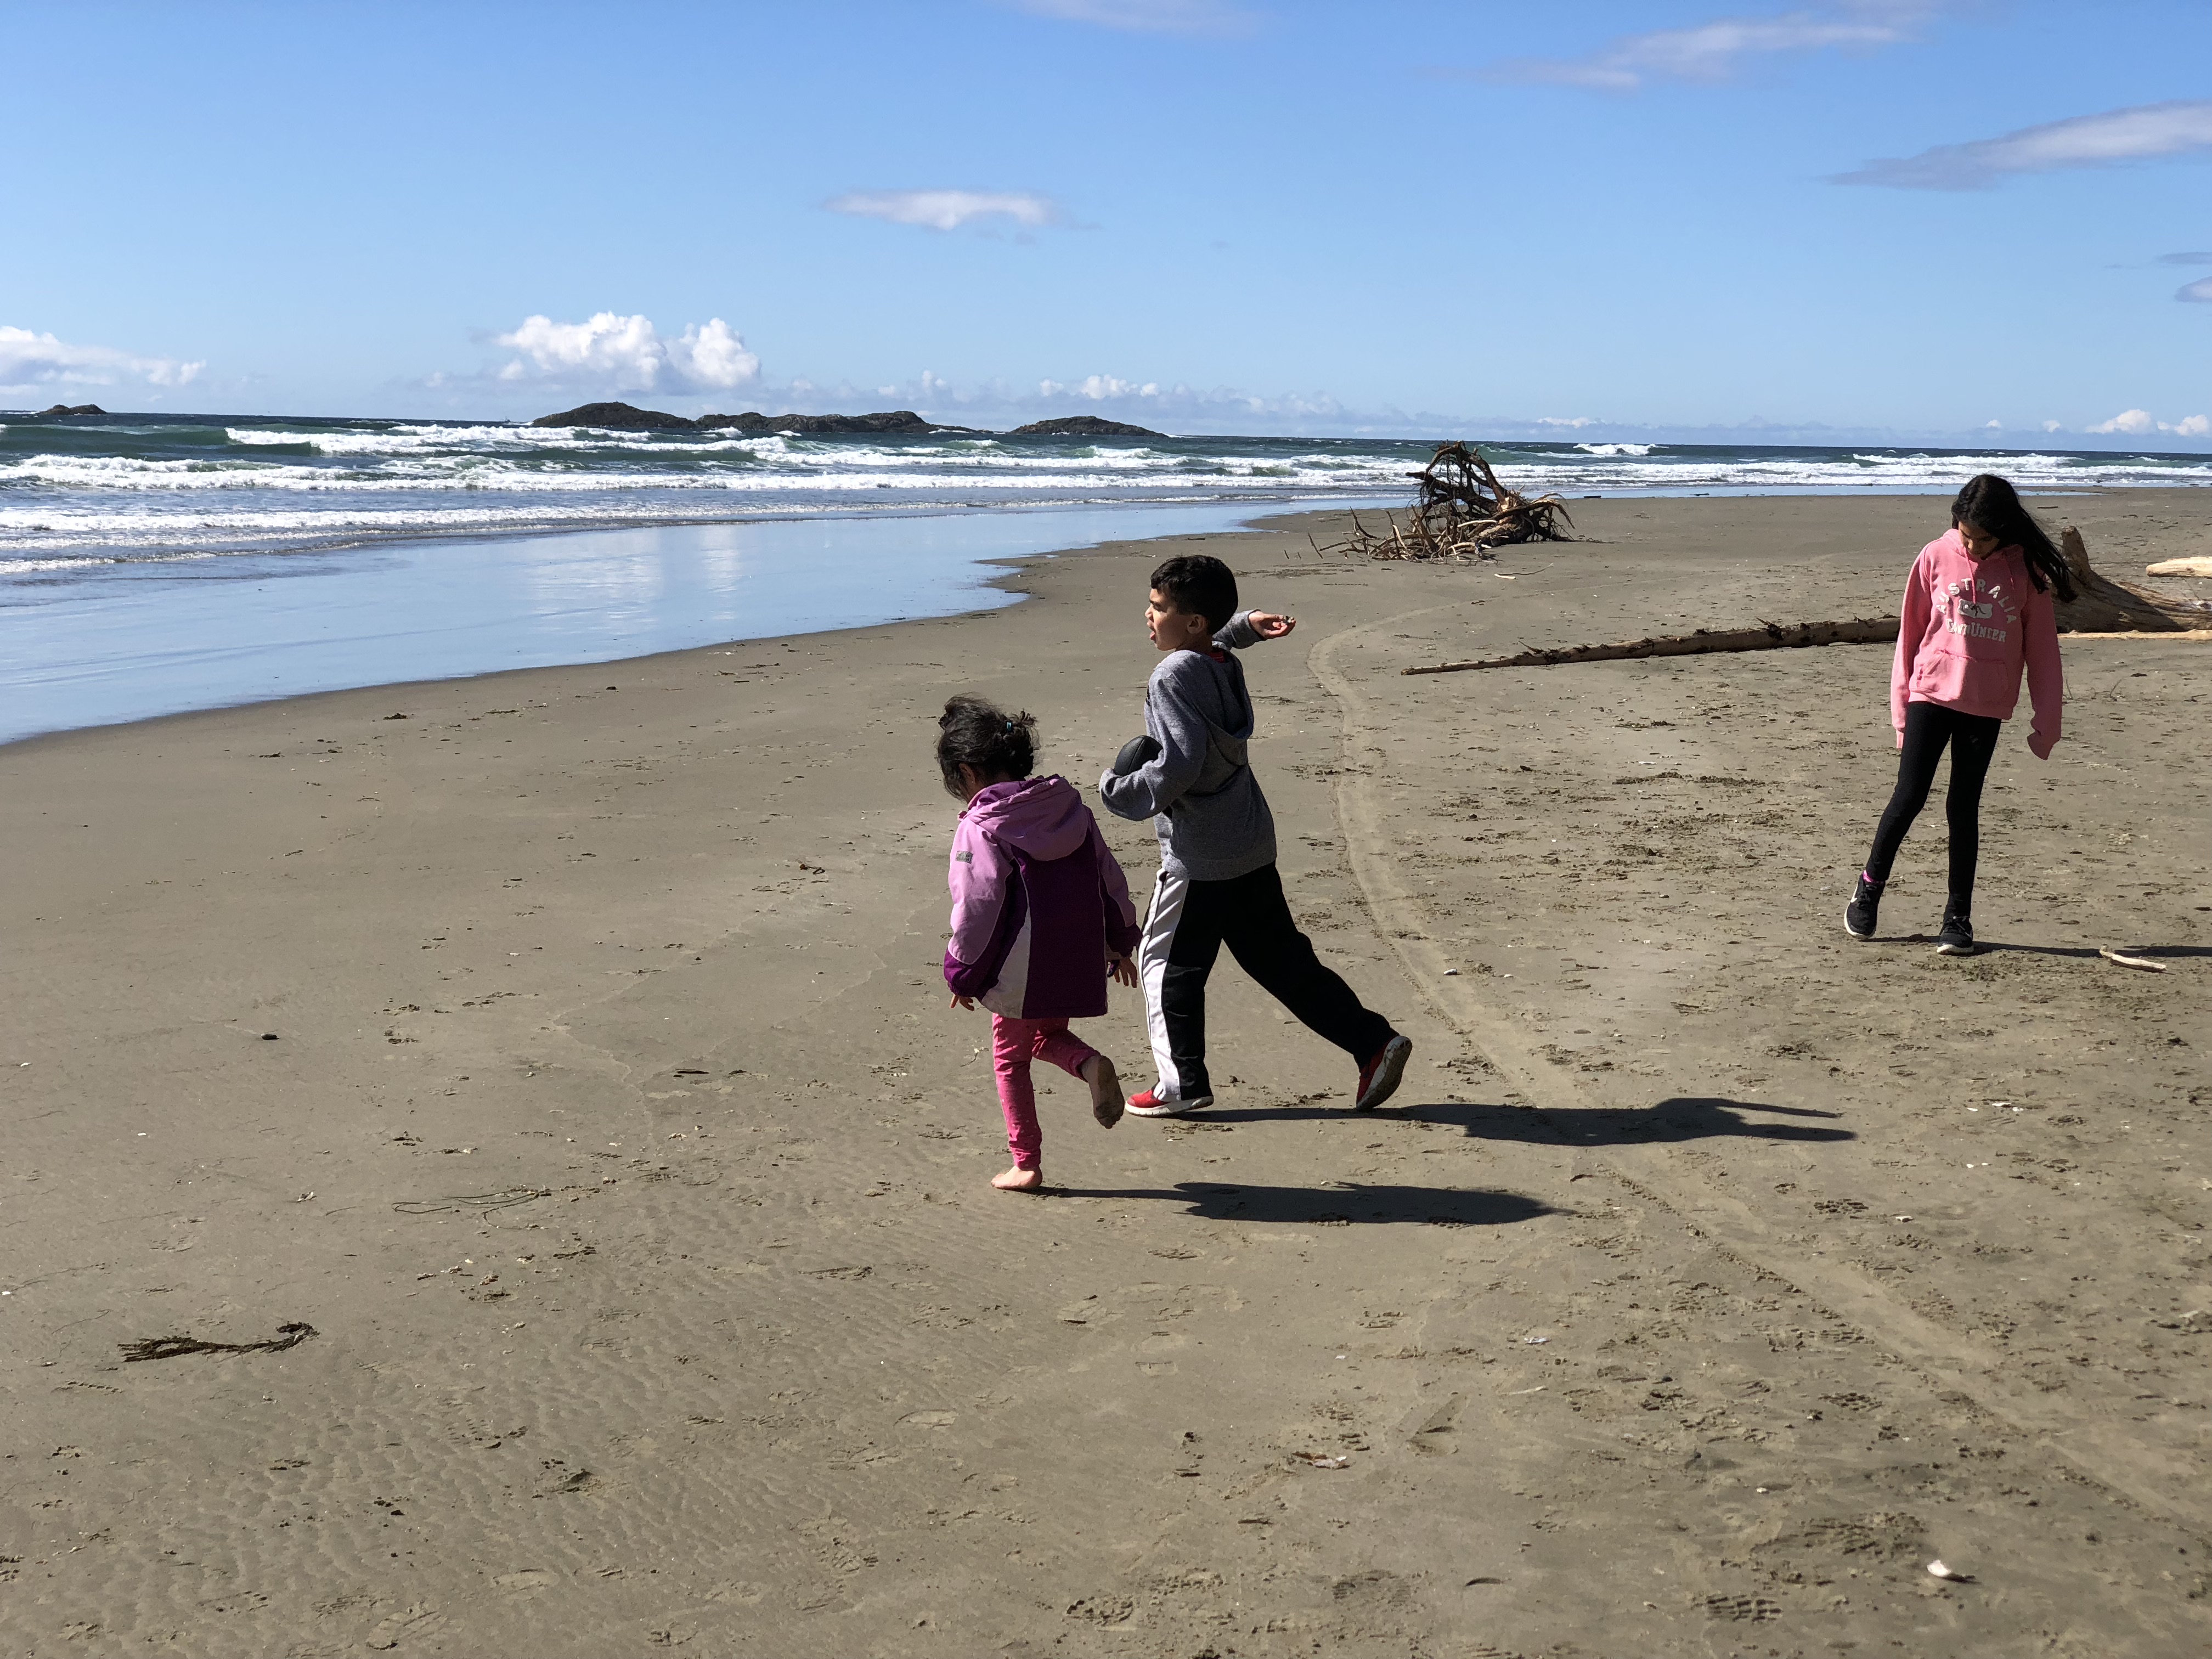 Should You Visit Ucluelet? Or Tofino?